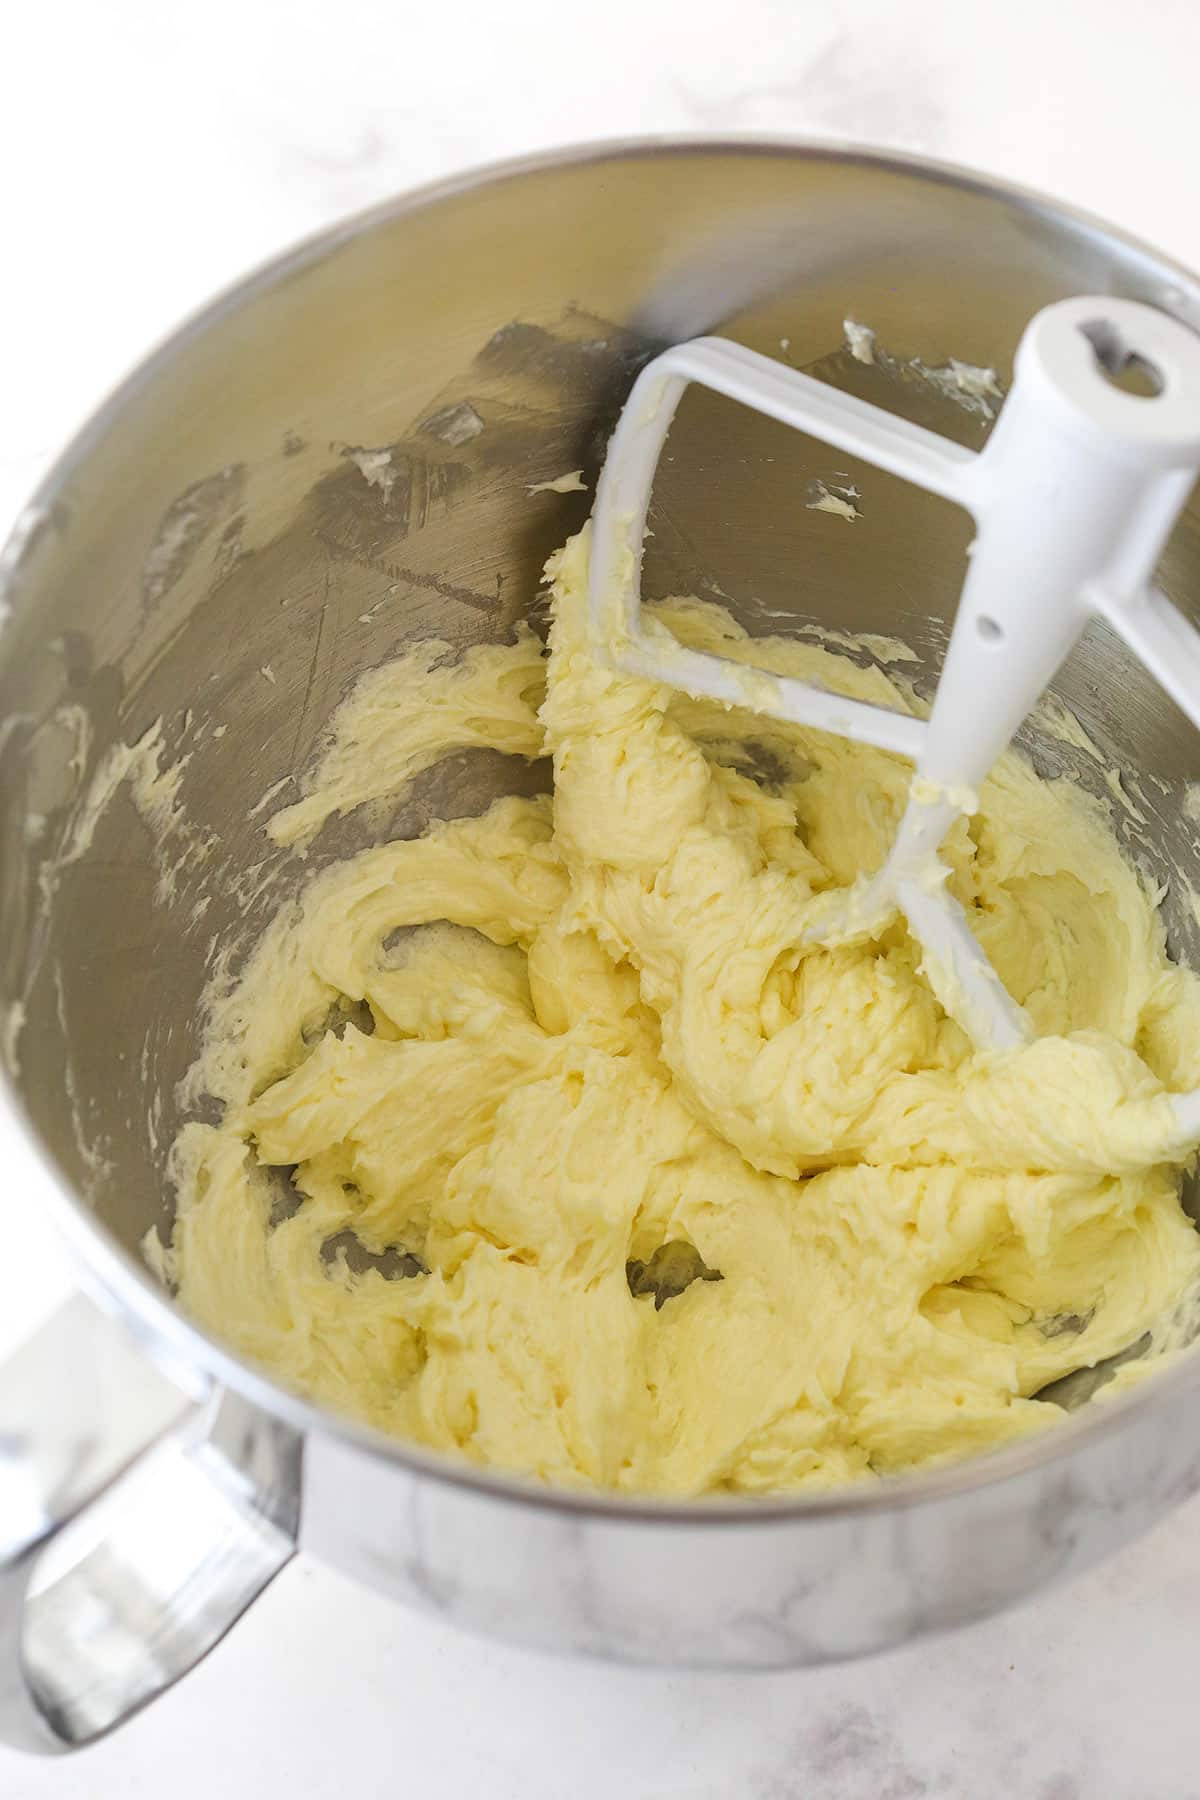 Mixing in egg into the creamed butter and sugar